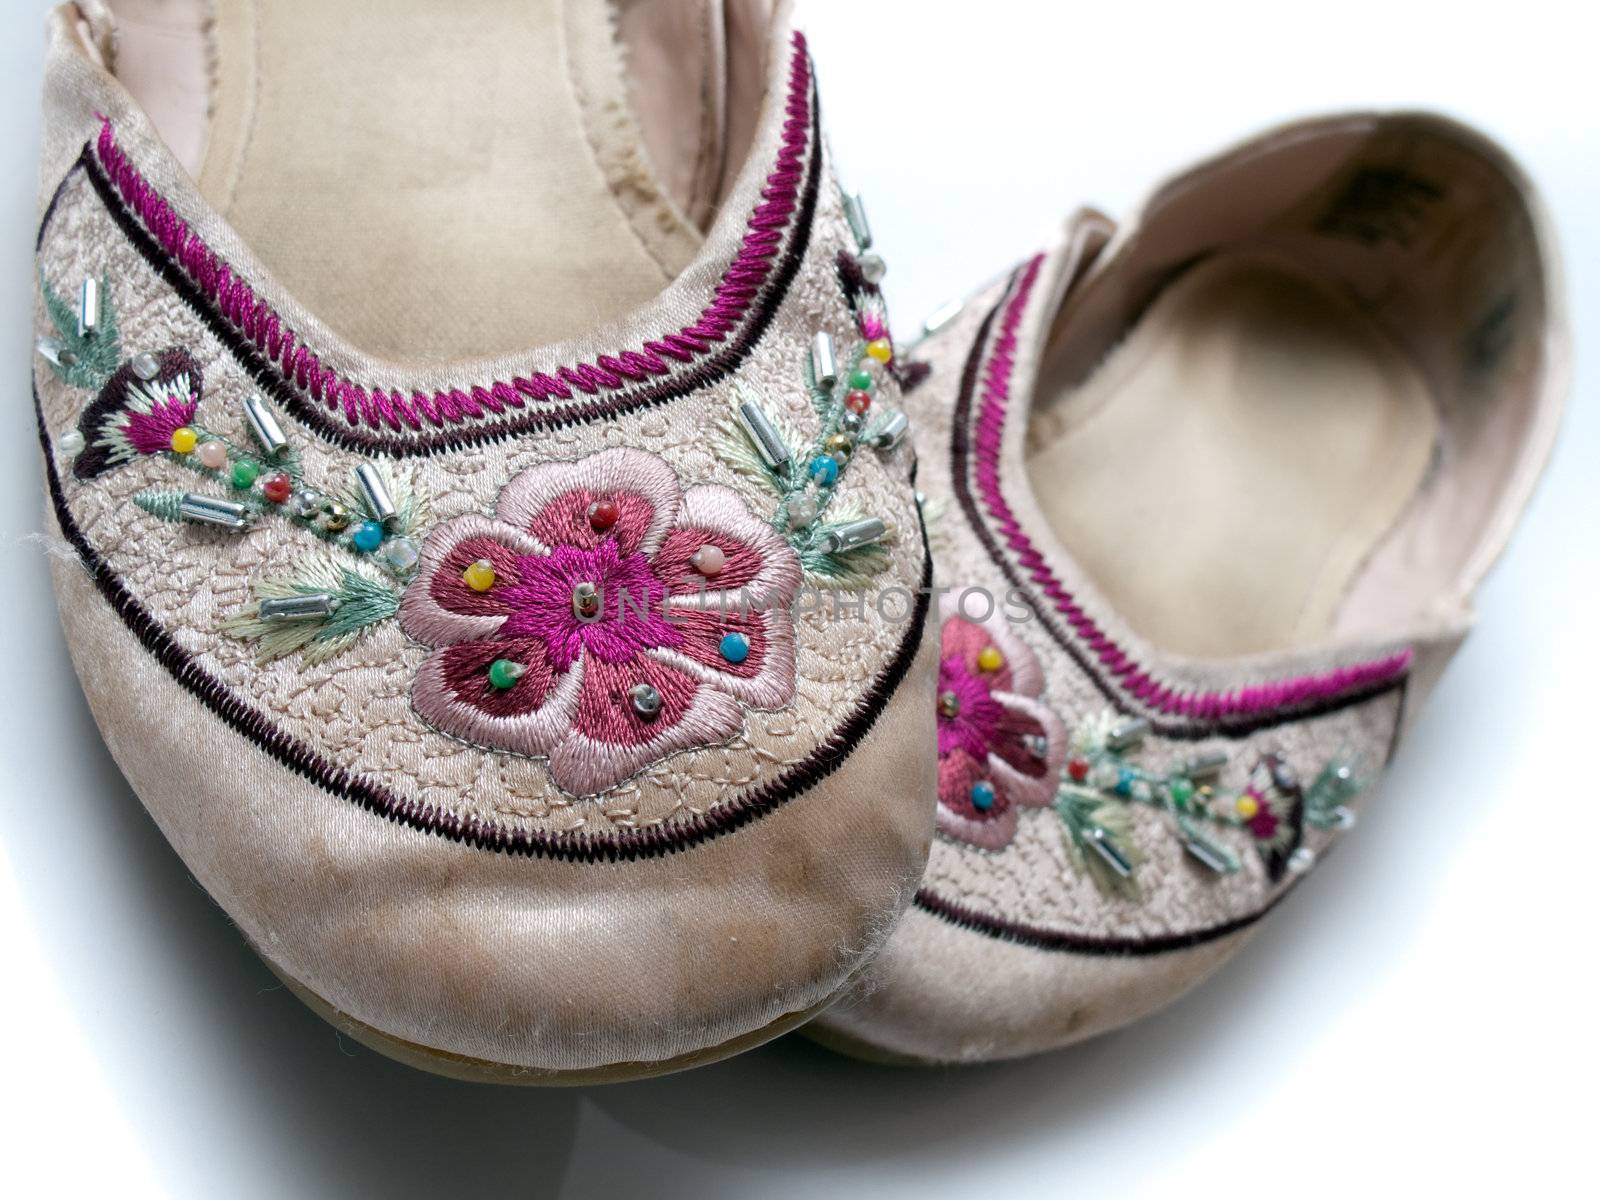 A set of woman / girl slippers, with some bead-work and stitching, isolated on white.